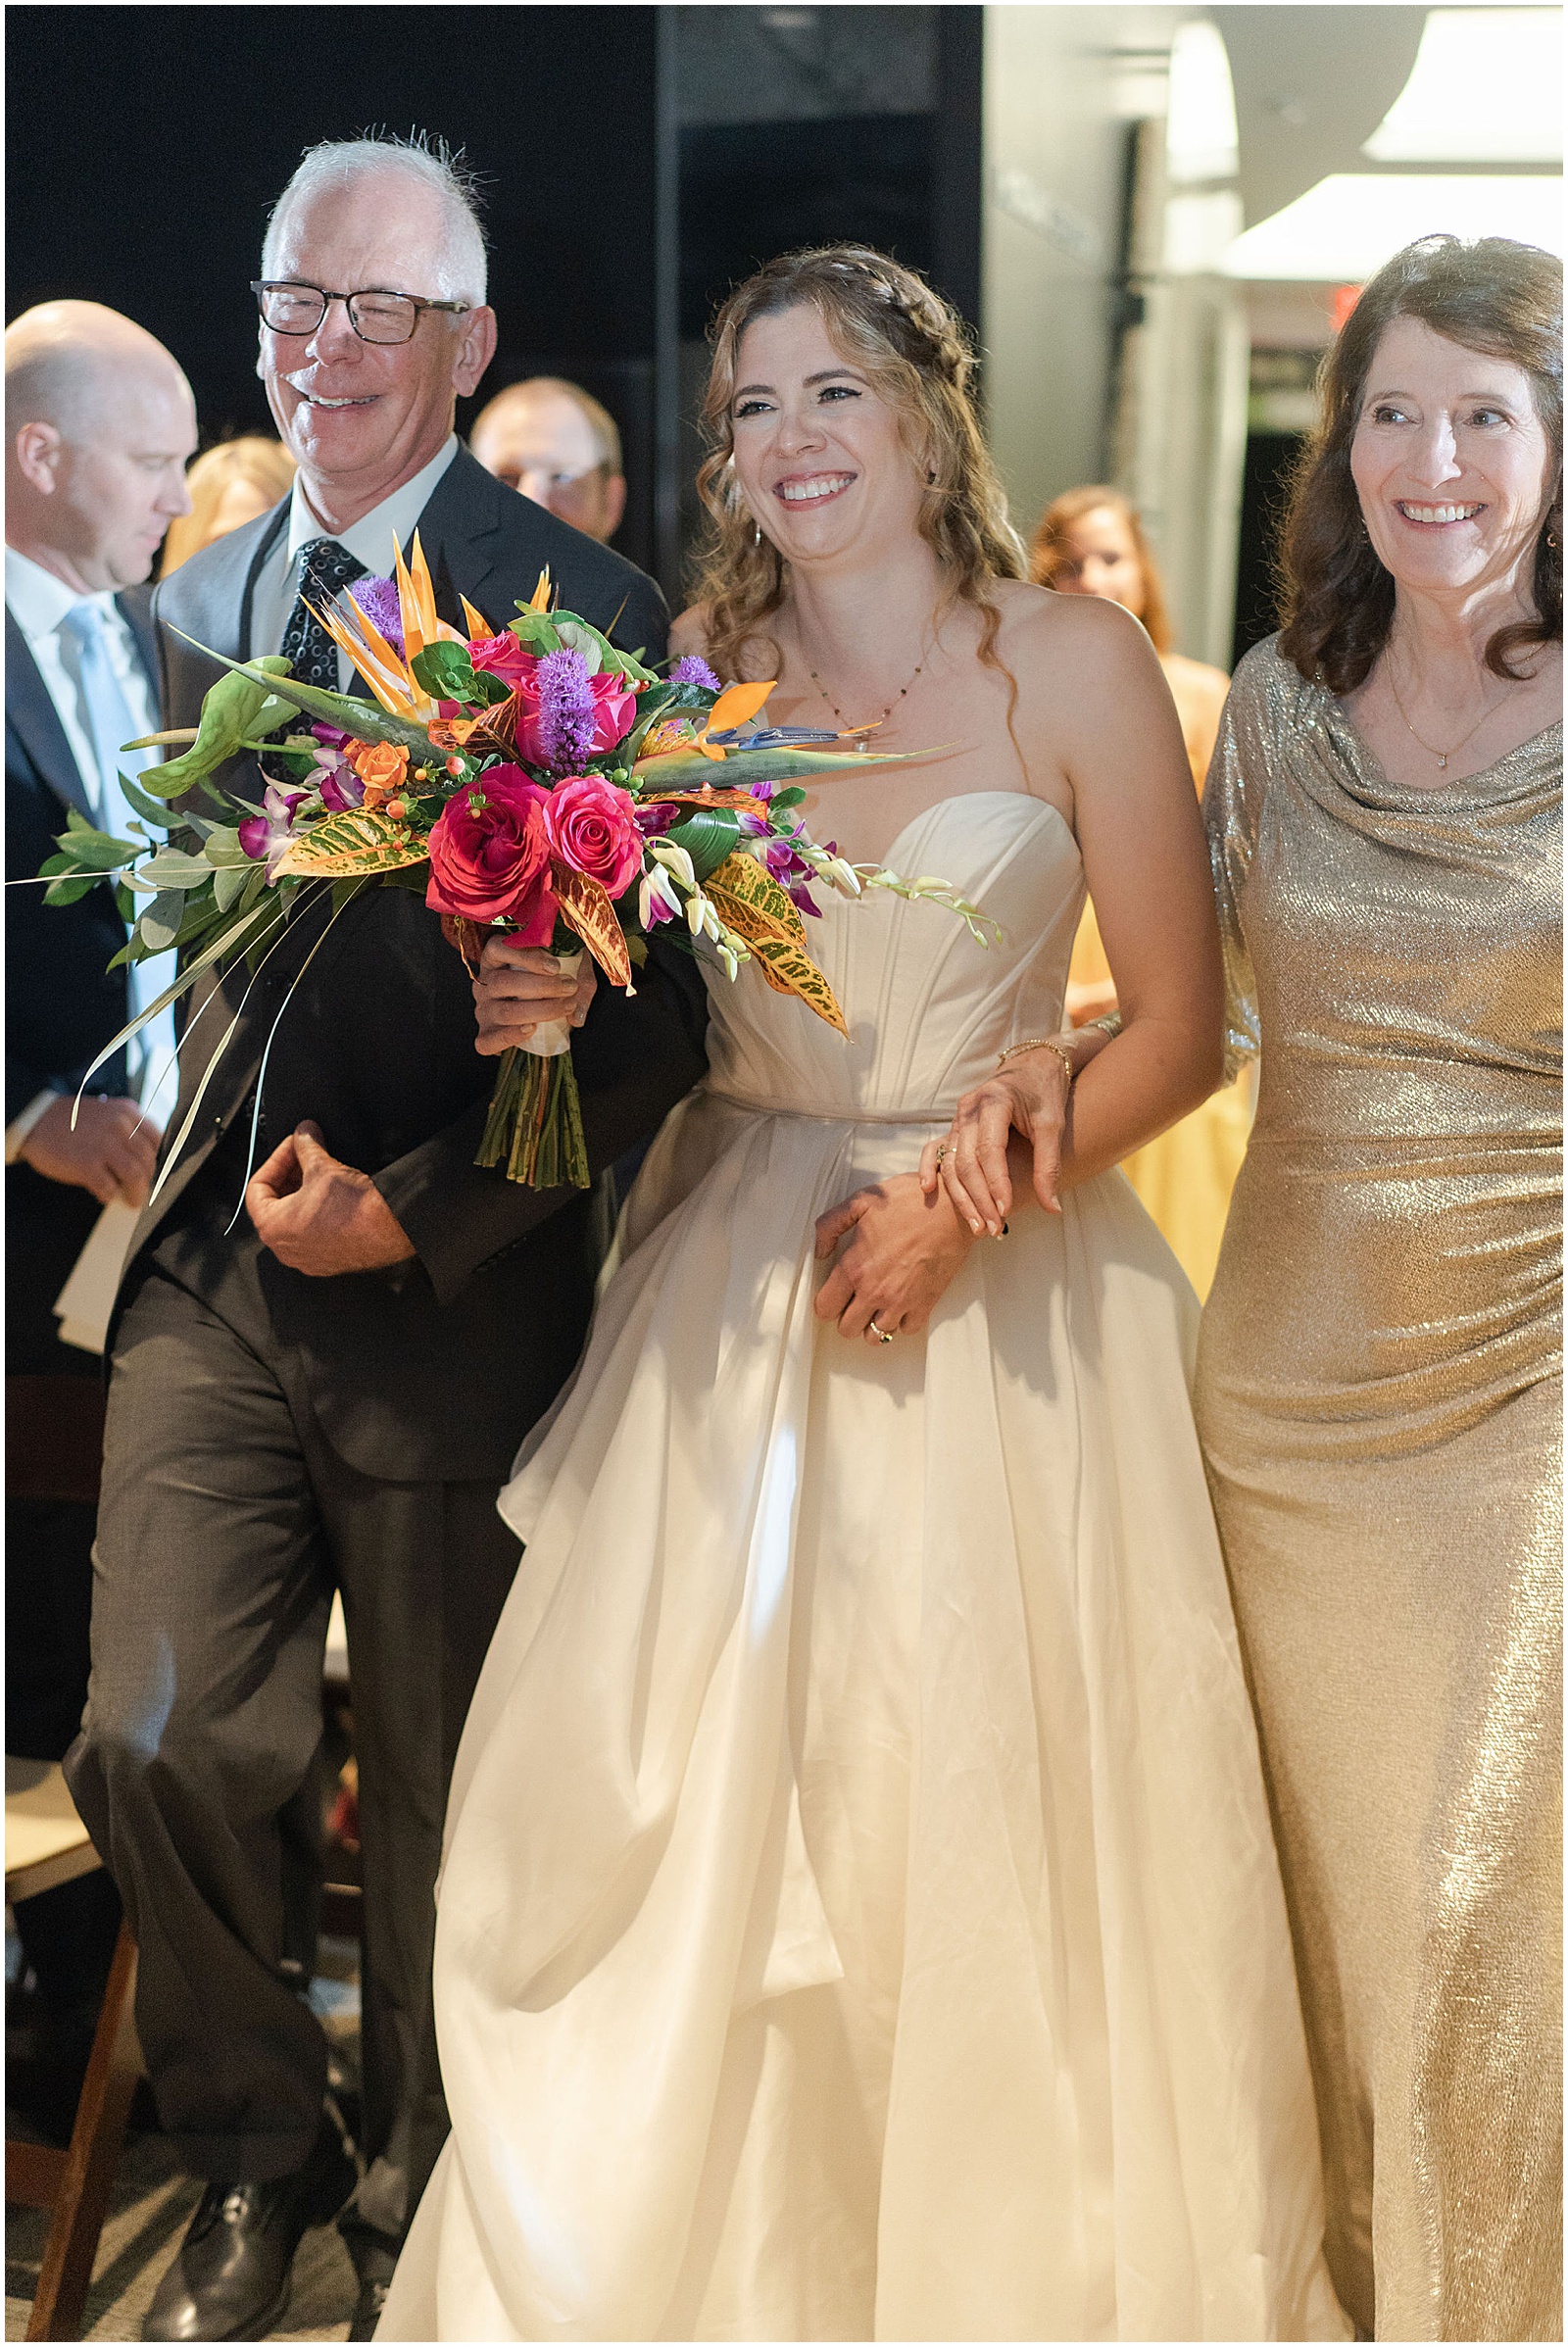 Wedding ceremony at Houston Museum of Natural Science | Swish and Click Photography